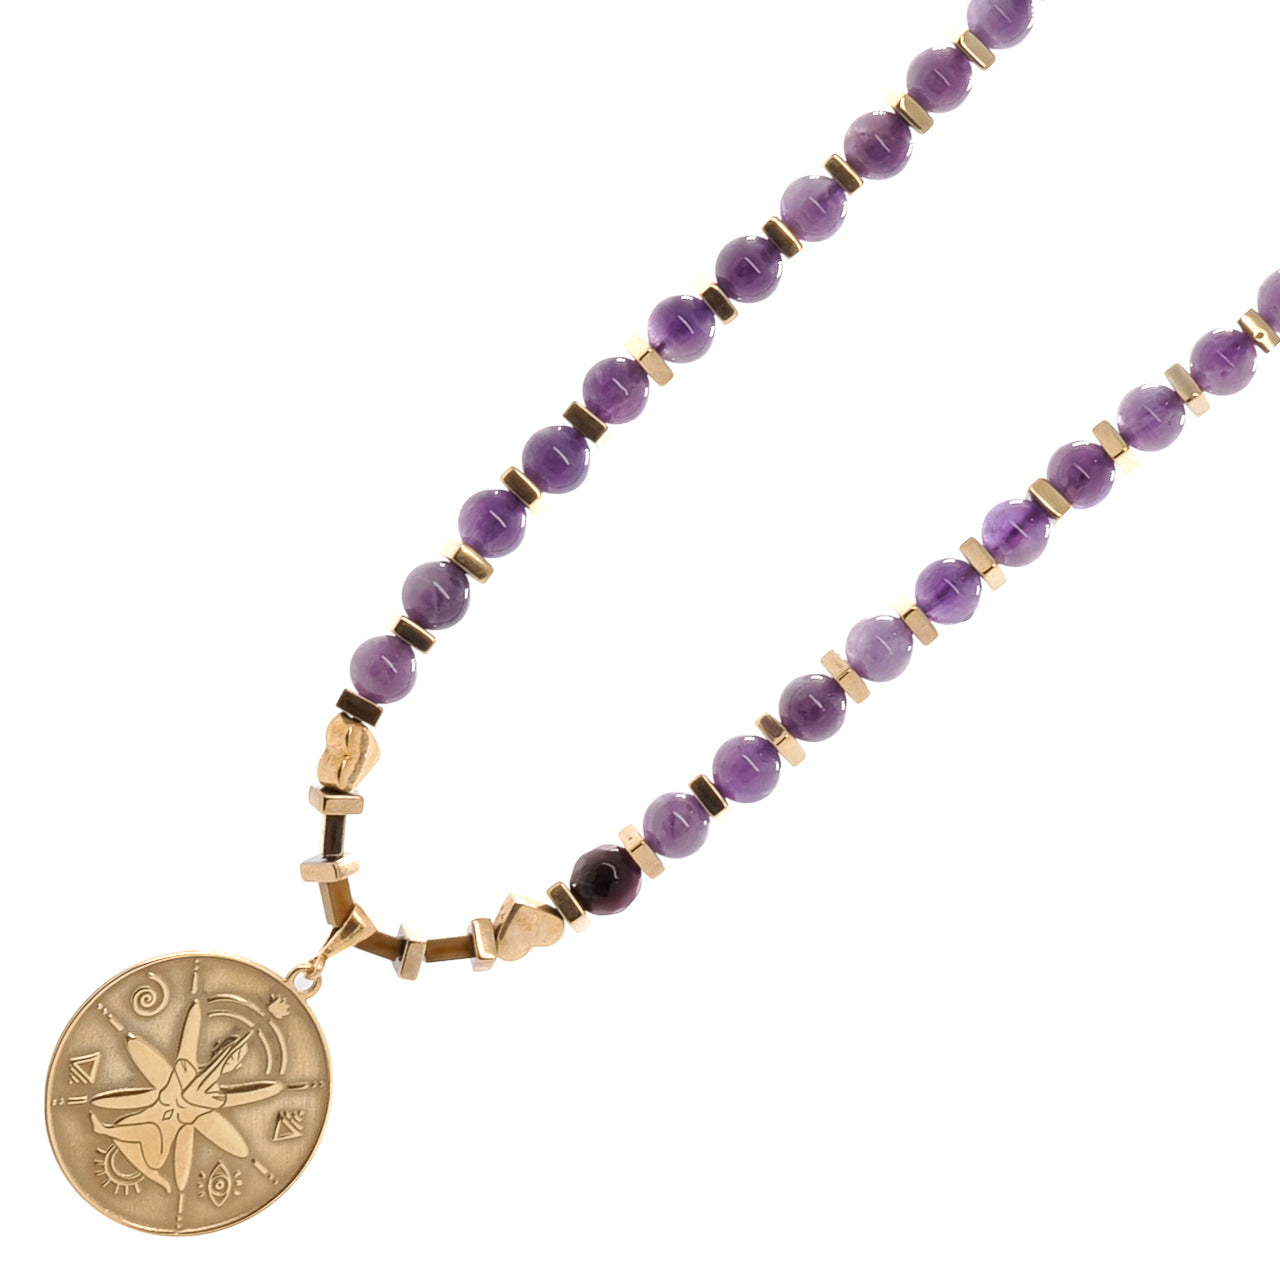 Simple Elegance - The See The Good Amethyst Choker Necklace Adds a Touch of Sophistication.